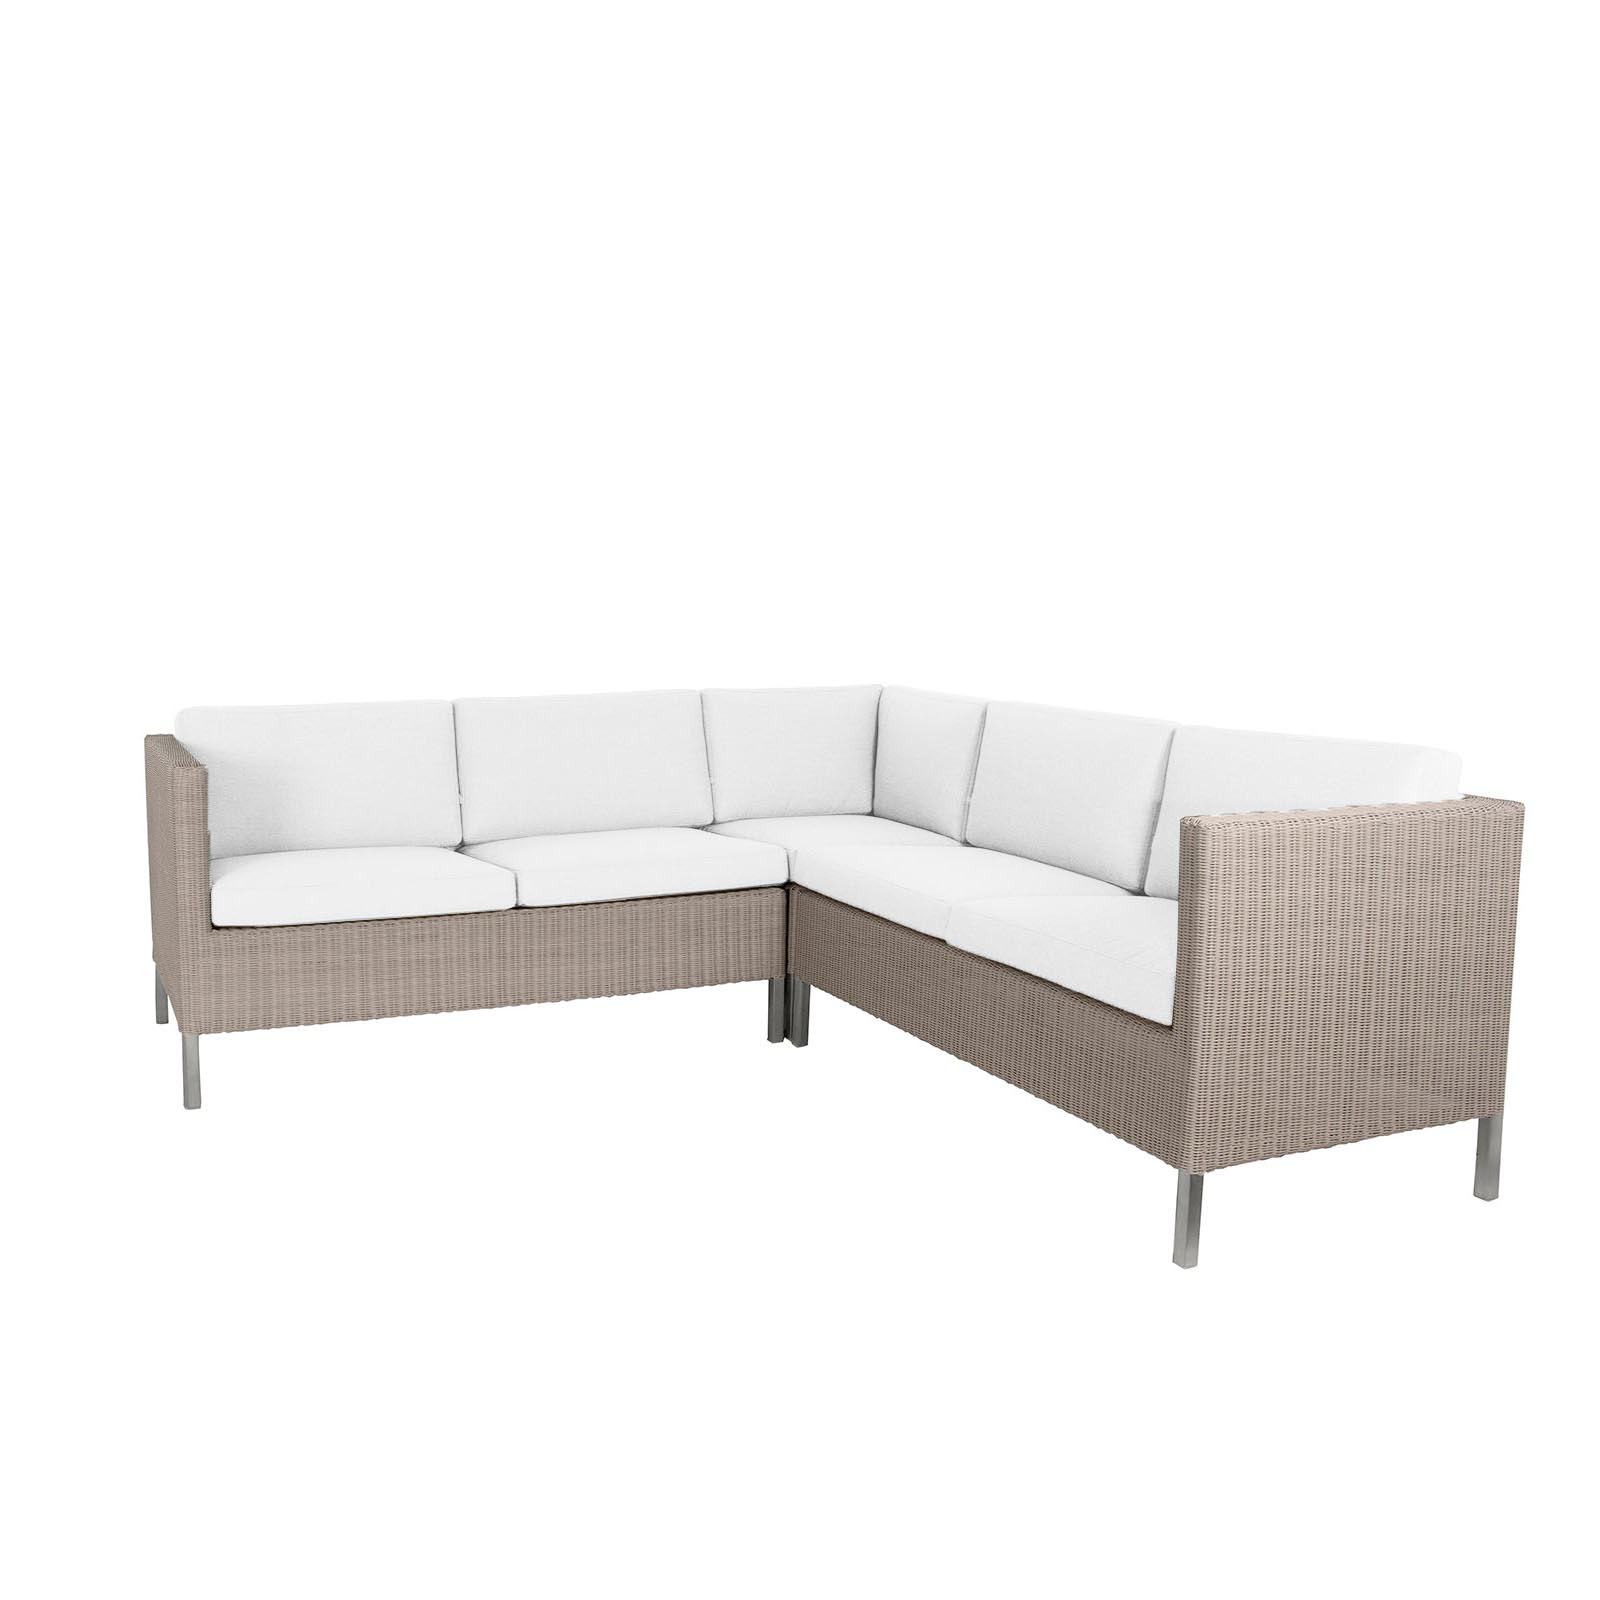 Connect Dining Lounge 20 aus Cane-line Weave in Taupe